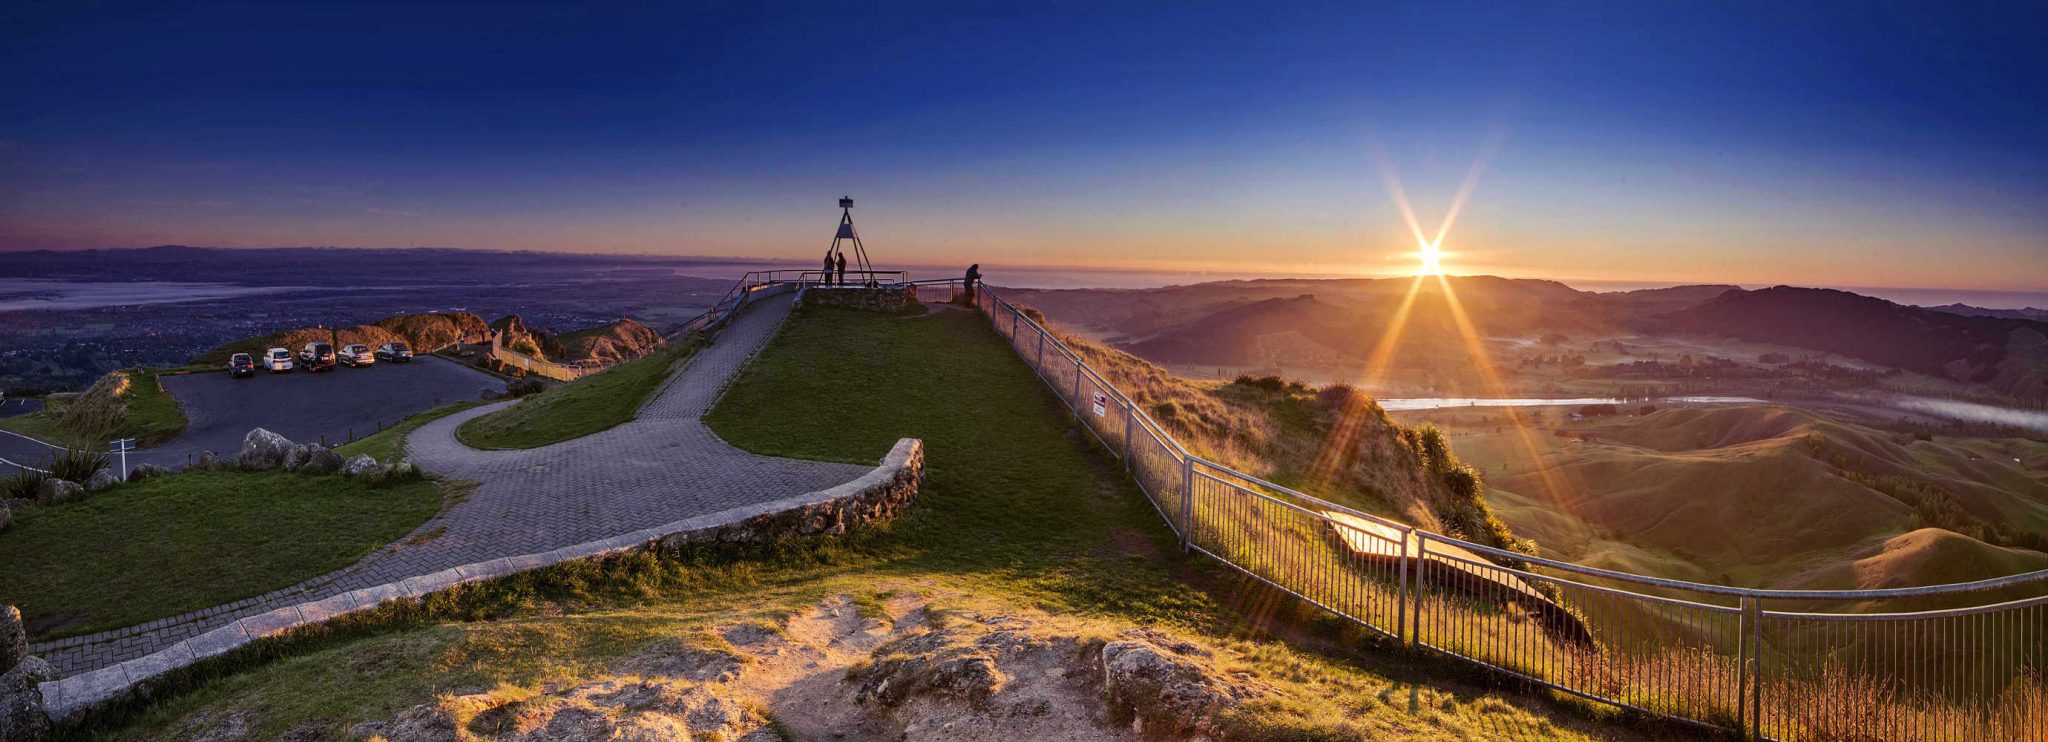 The view from the Mighty Te Mata Peak, New Zealand at dawn...